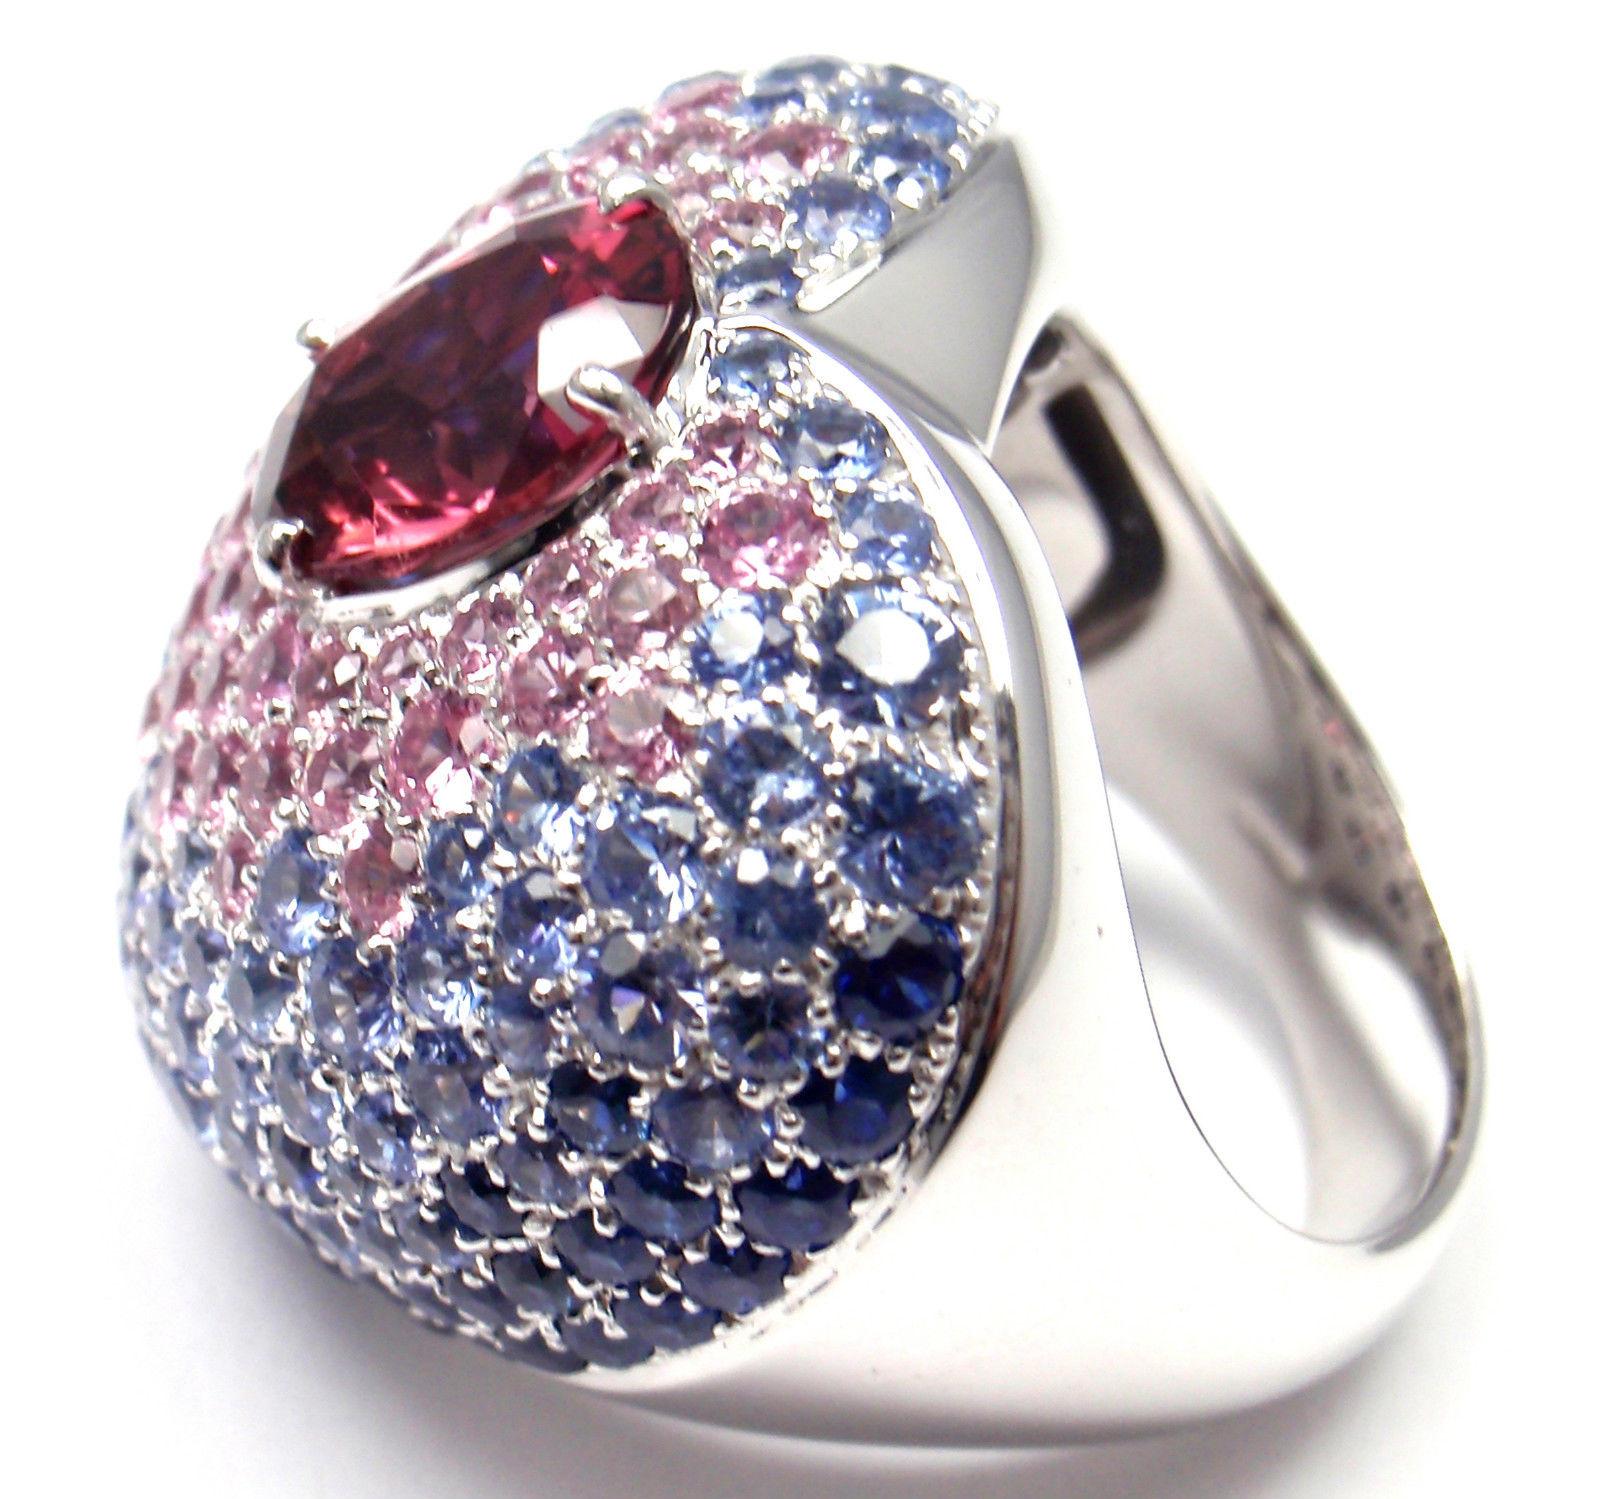 18k White Gold Sapphire Pink Tourmaline VANITA Ring by Pasquale Bruni.
With Sapphires (blue & pink) 7.31ct
Pink Tourmaline 2.2ct
This ring comes with Box, Certificate and Tag. 
Details:
Size: 7
Weight: 23.1 grams
Width: 26.5mm
Stamped Hallmarks: